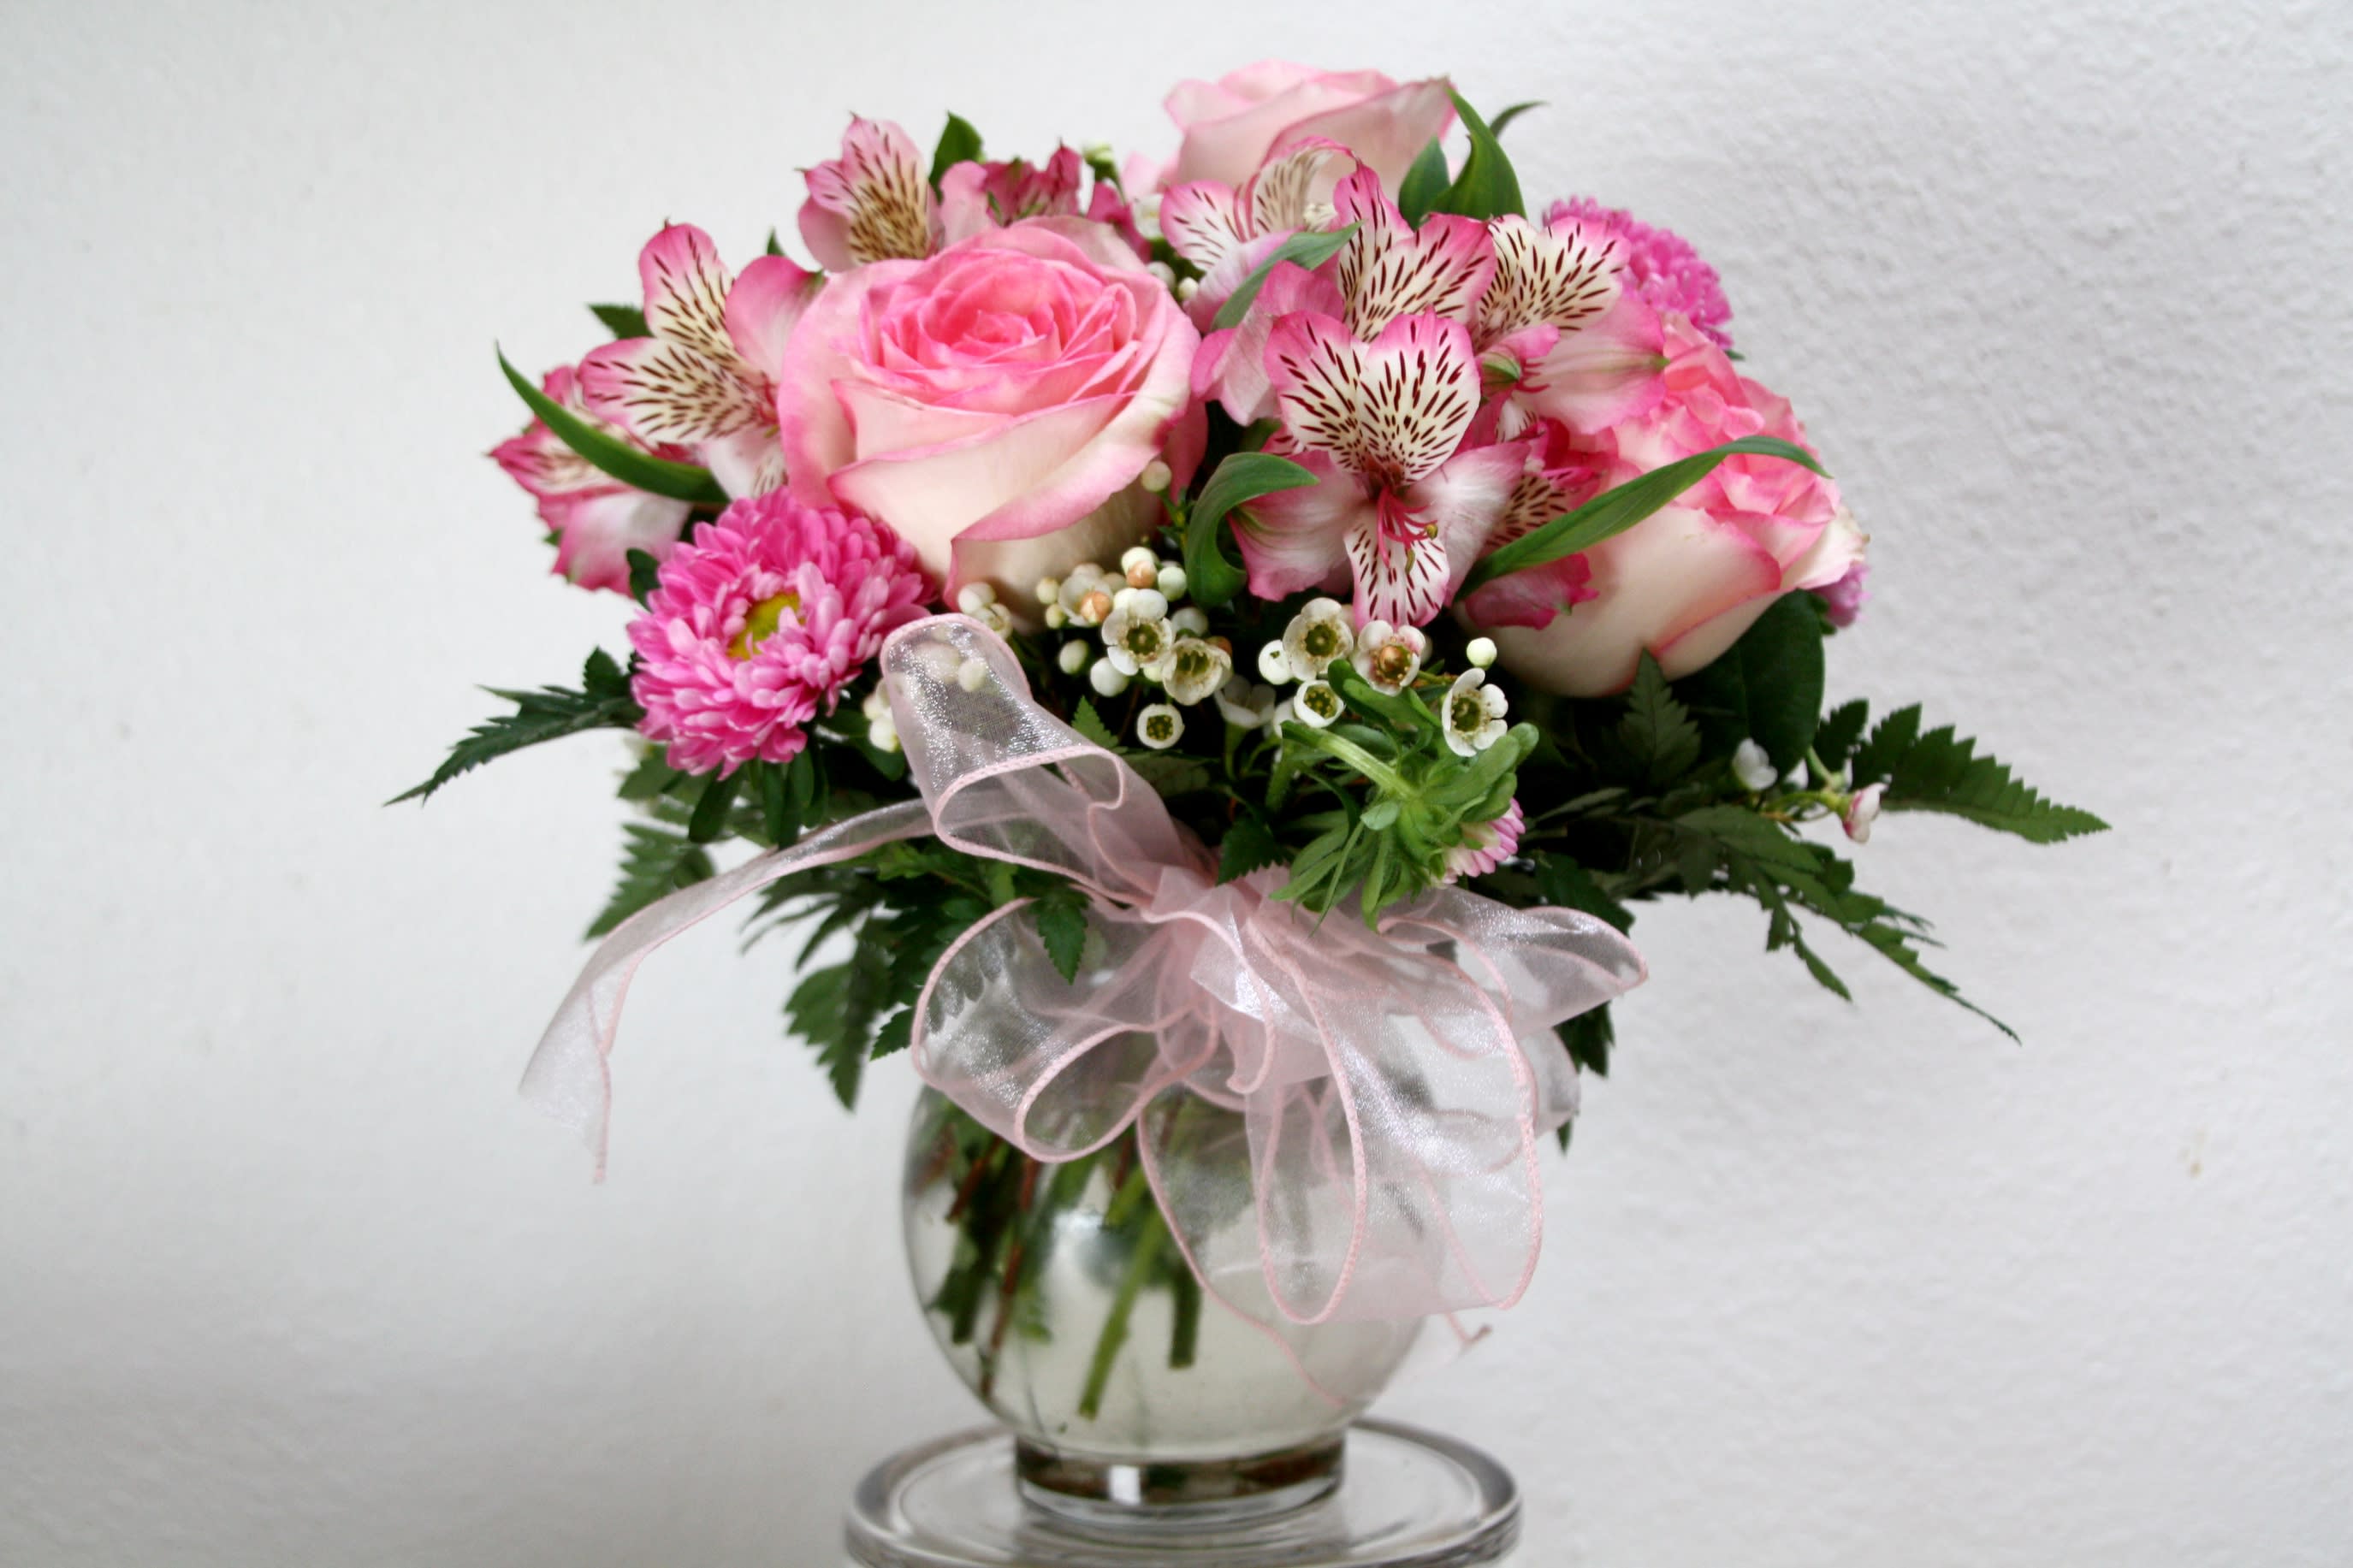 Soft-Spoken - This beautiful arrangement comes with light pink roses, pink alstromeria, and pink asters. It’s accented with waxflower and comes in a clear glass vase and complete with a matching bow. The perfect gift for this Valentine’s Day!